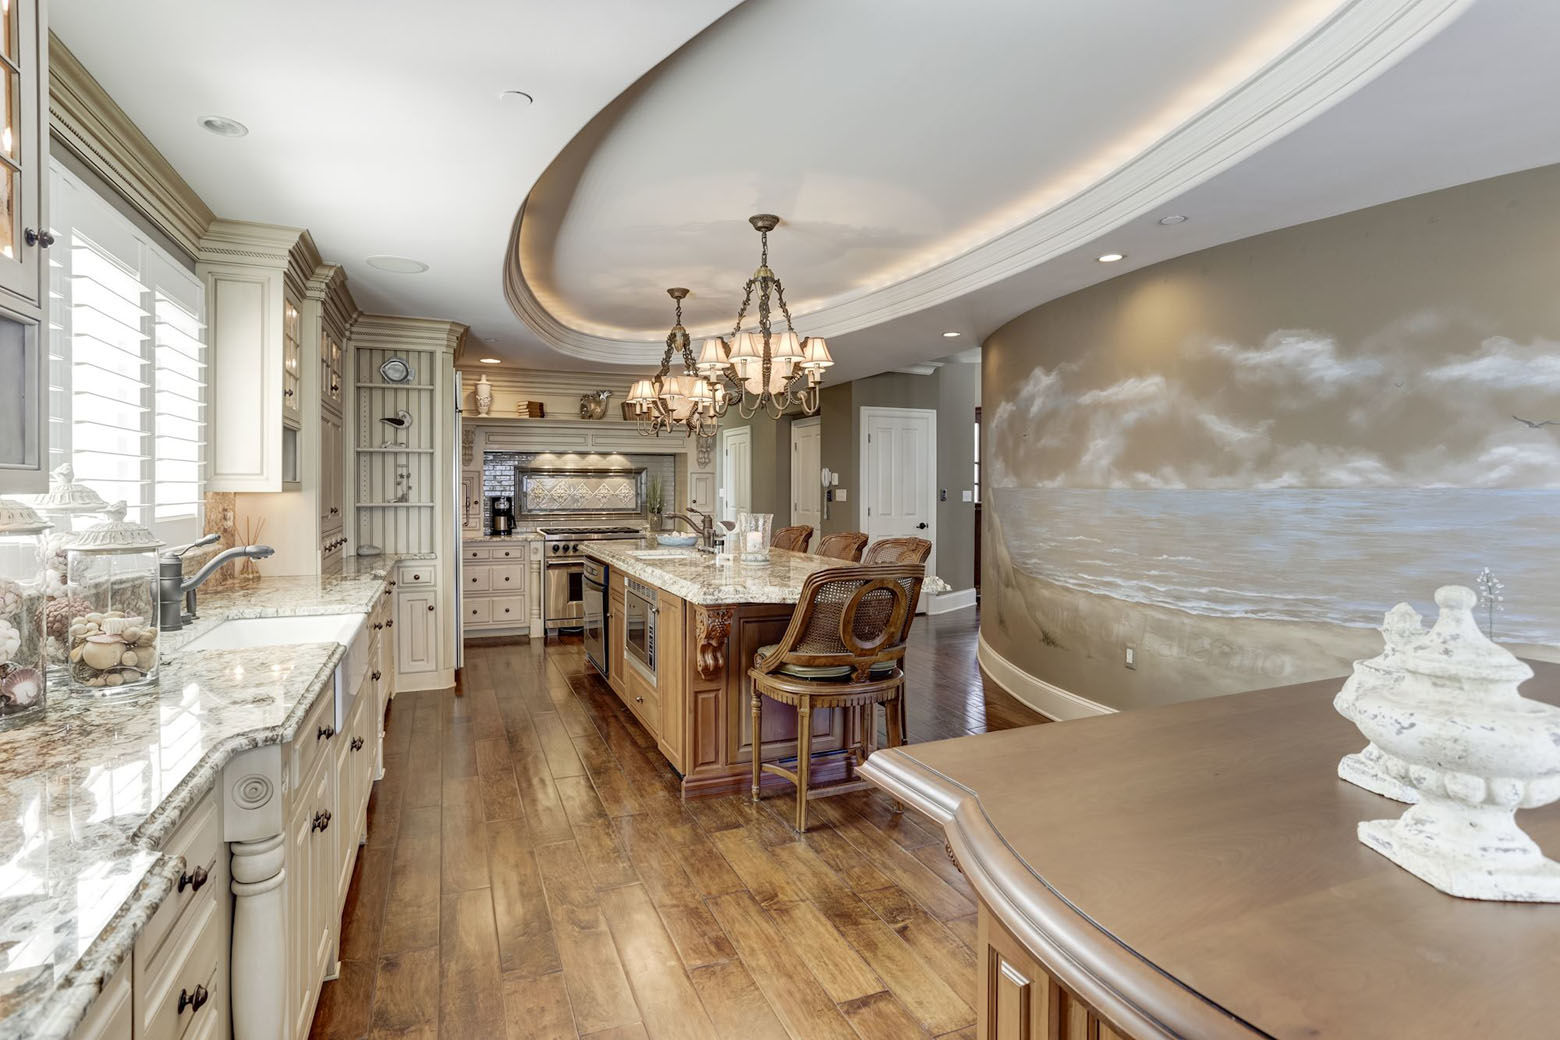 The kitchen includes sinks, two dishwashers and two islands, and a hand-painted mural of the sea. (Courtesy HomeVisit)